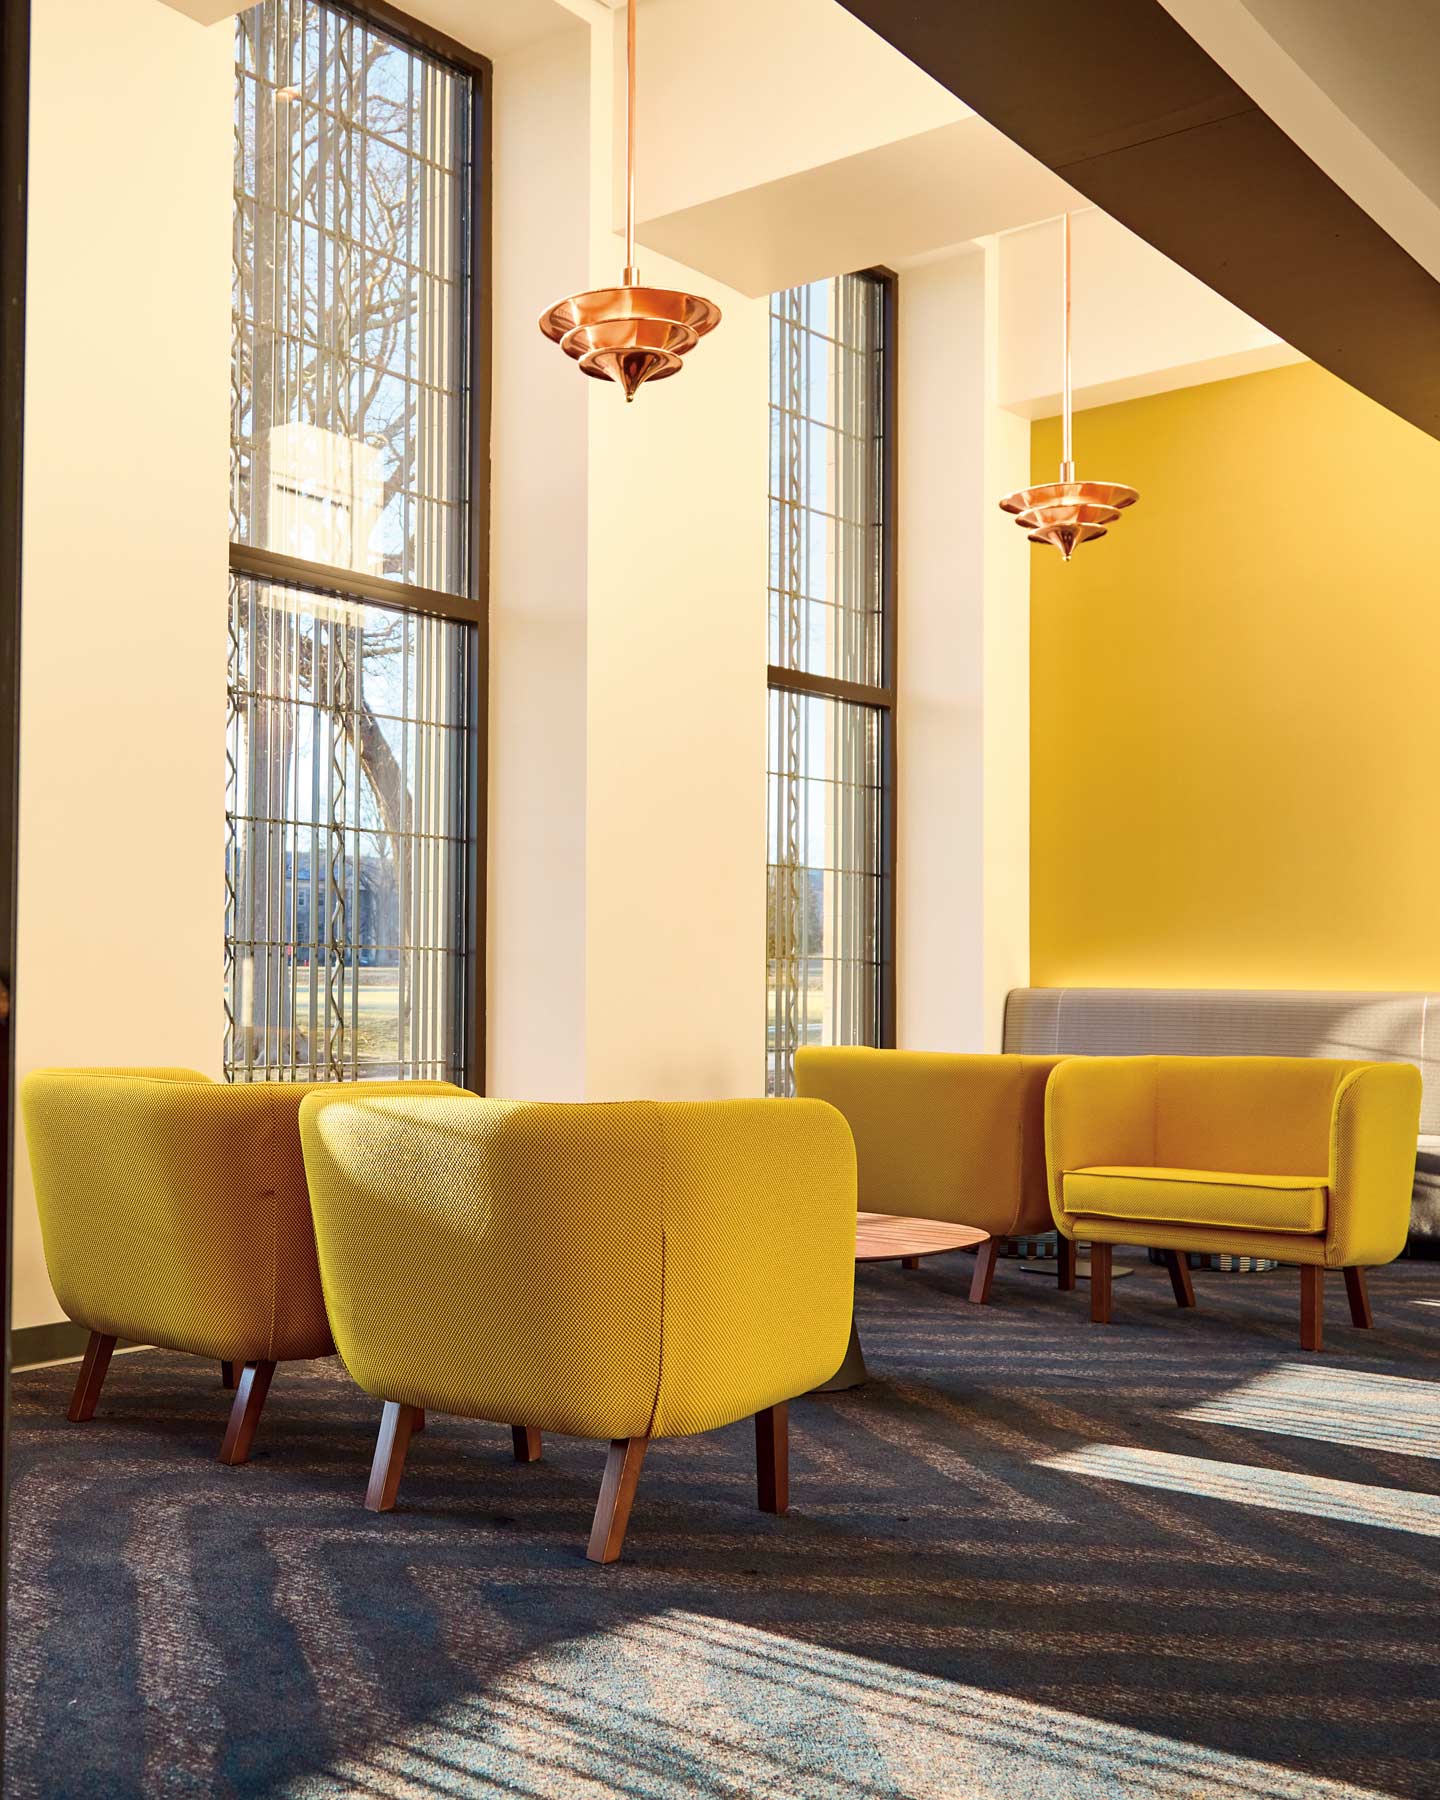 Image of chairs and windows in the Hovey Lobby at Athey Center